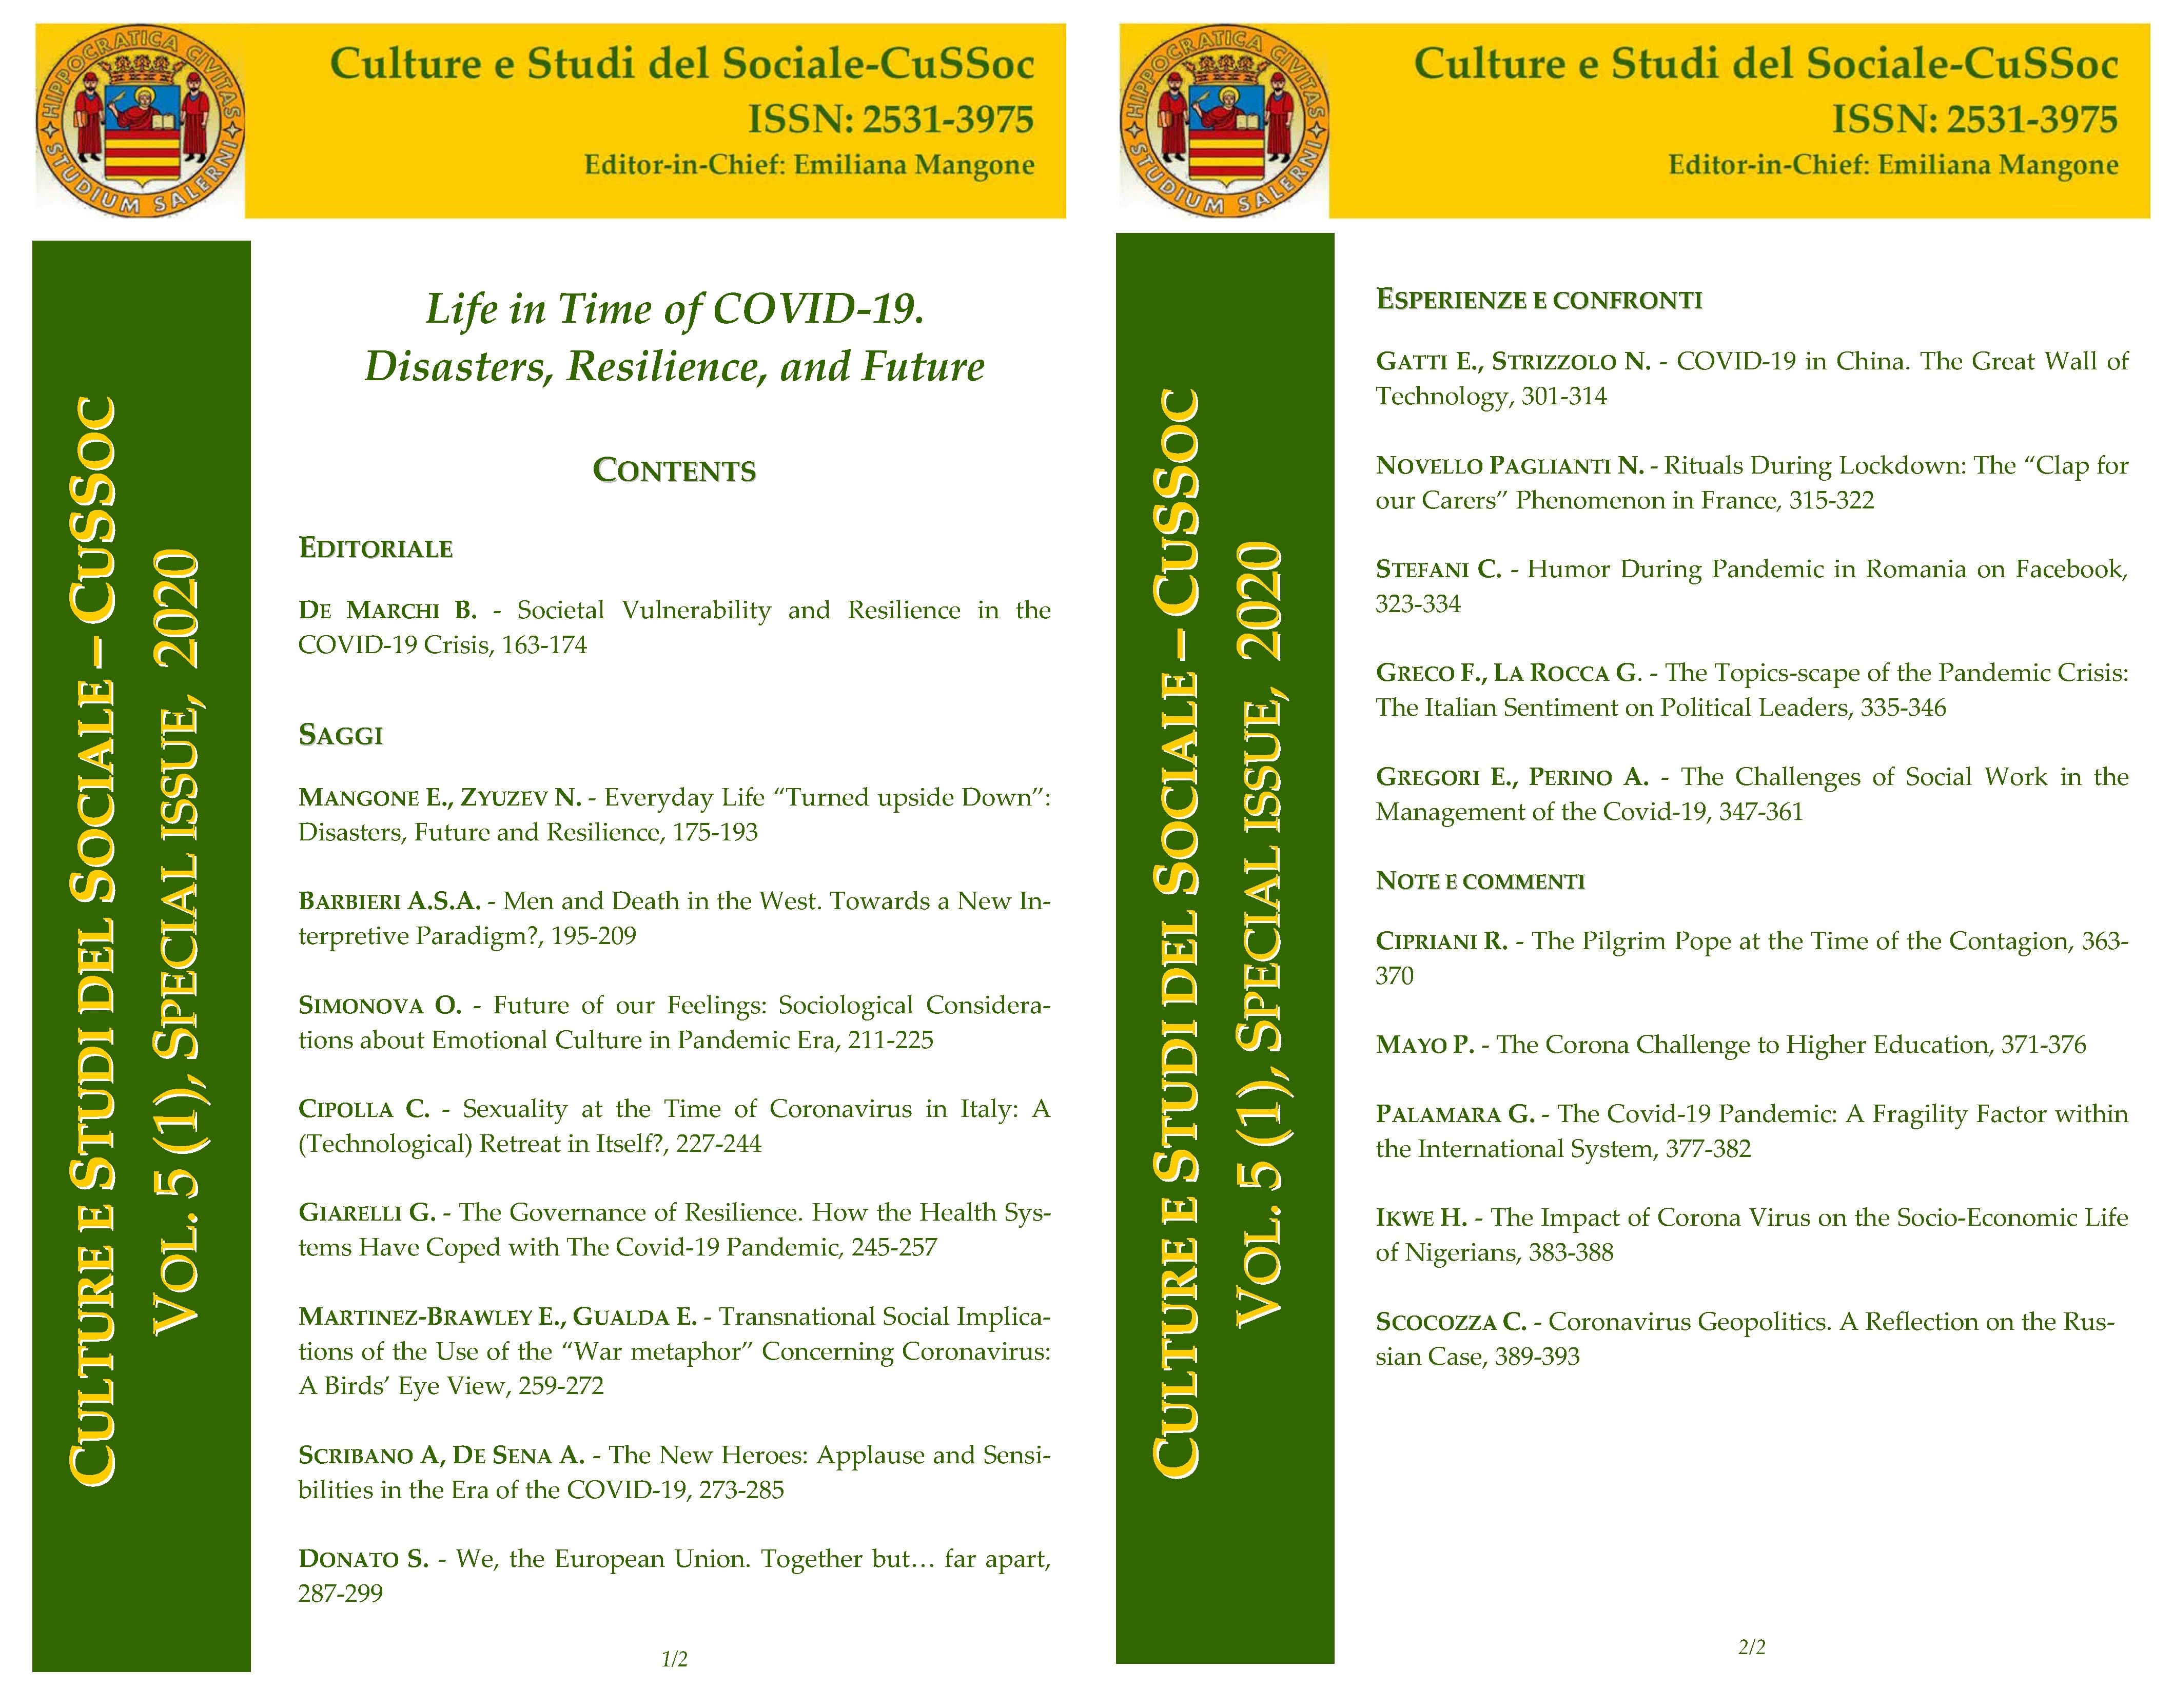 					View Vol. 5 No. 1, Special (2020): Life in the Time of COVID-19. Disasters, Resilience, and Future
				